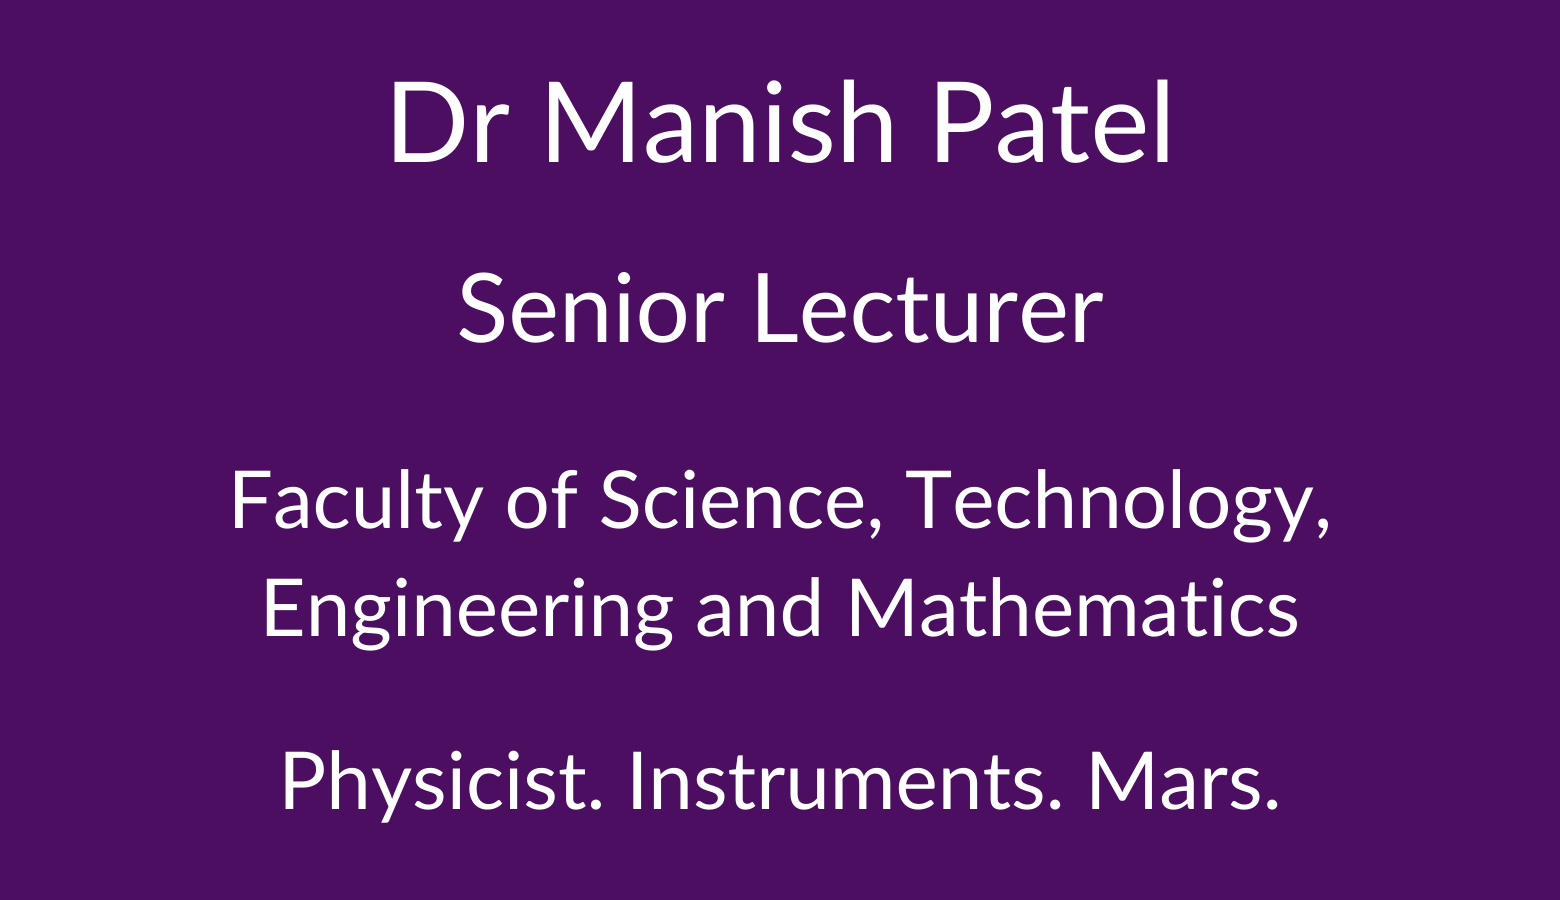 Dr Manish Patel. Senior Lecturer. Faculty of Science. Technology, Engineering and Mathematics. Physicist. Instruments. Mars